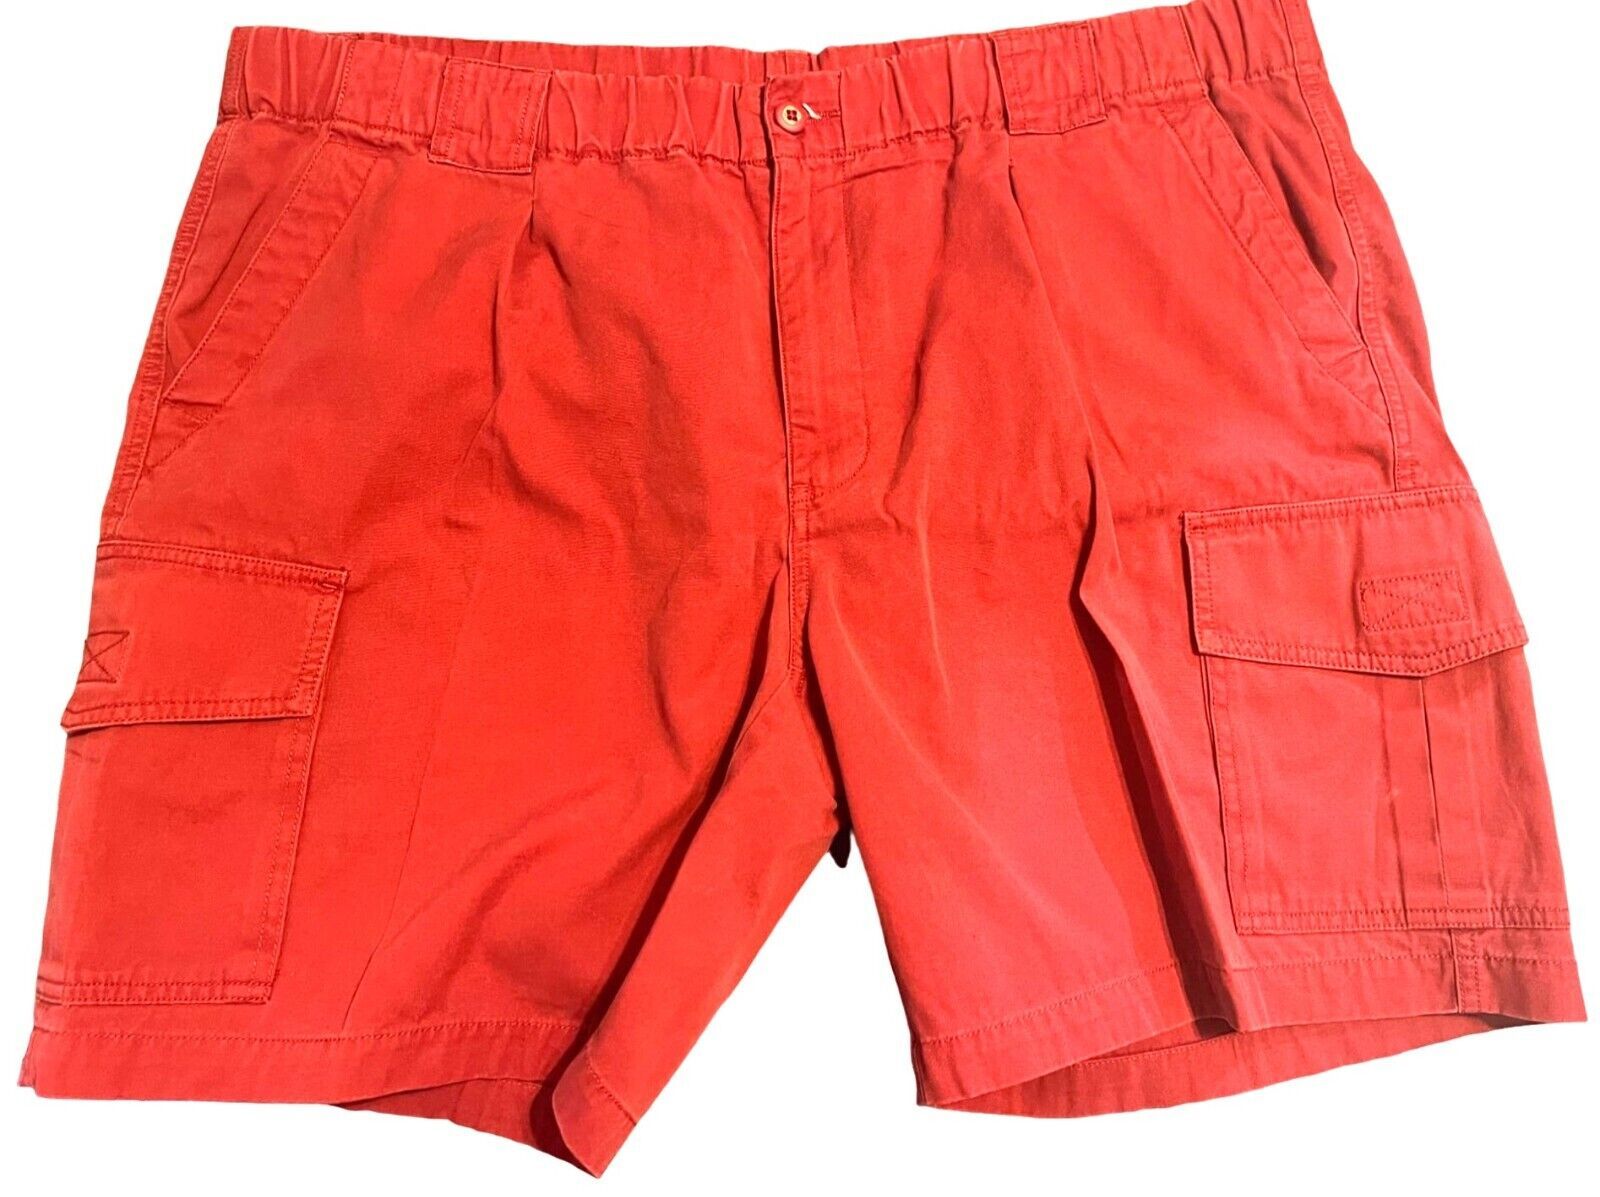 Tommy Bahama Red Shorts Mens Large Freshly Dry Cleaned - $11.76